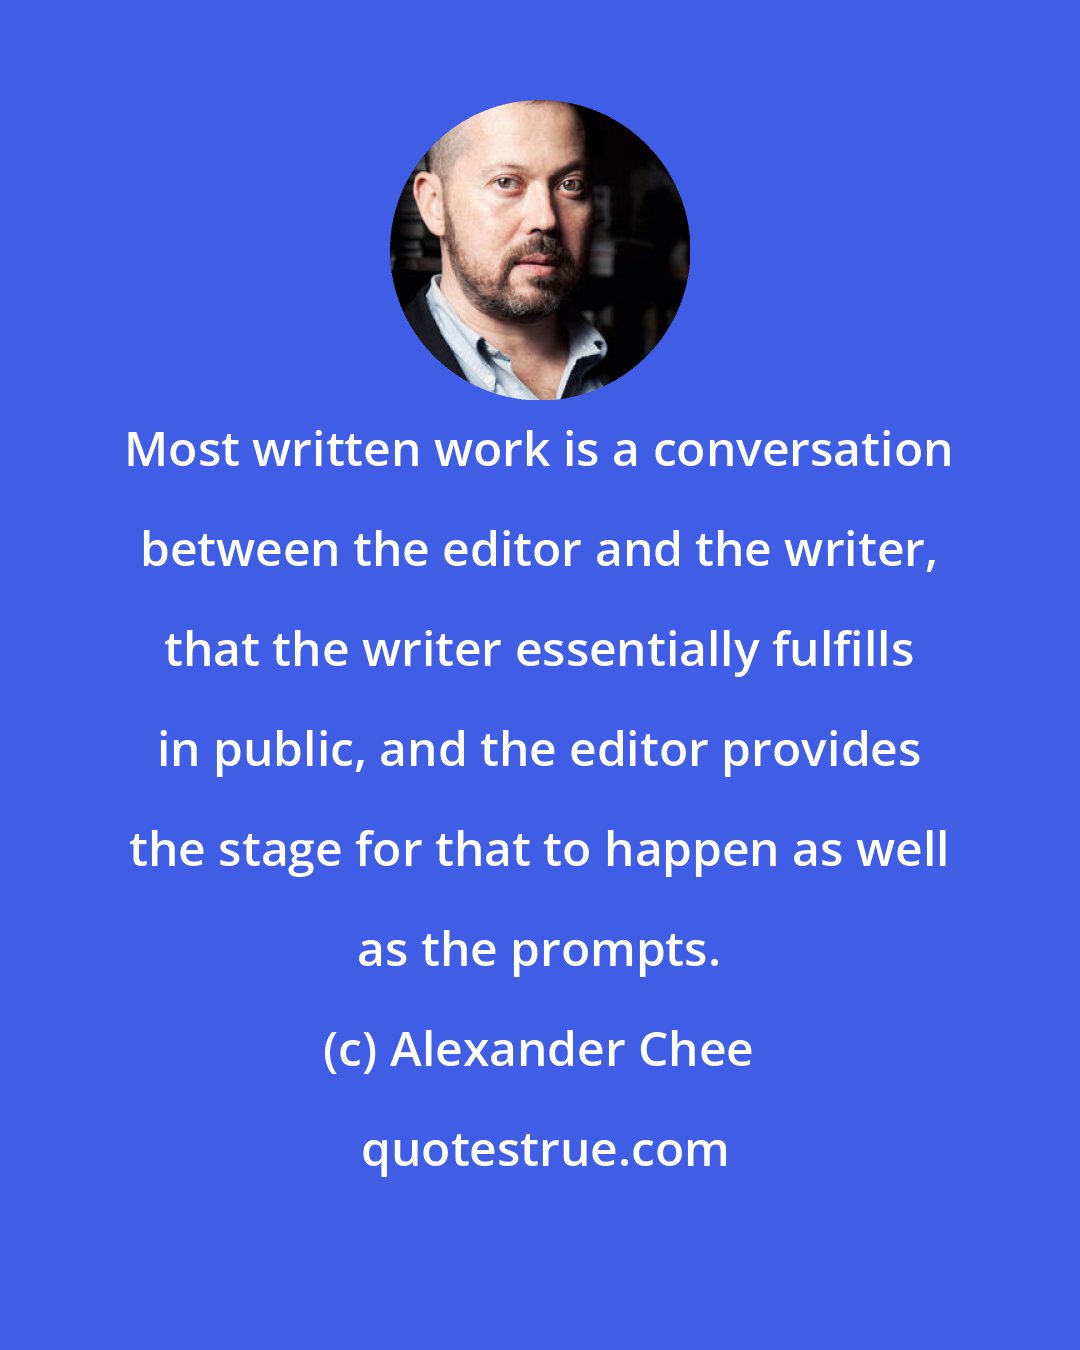 Alexander Chee: Most written work is a conversation between the editor and the writer, that the writer essentially fulfills in public, and the editor provides the stage for that to happen as well as the prompts.